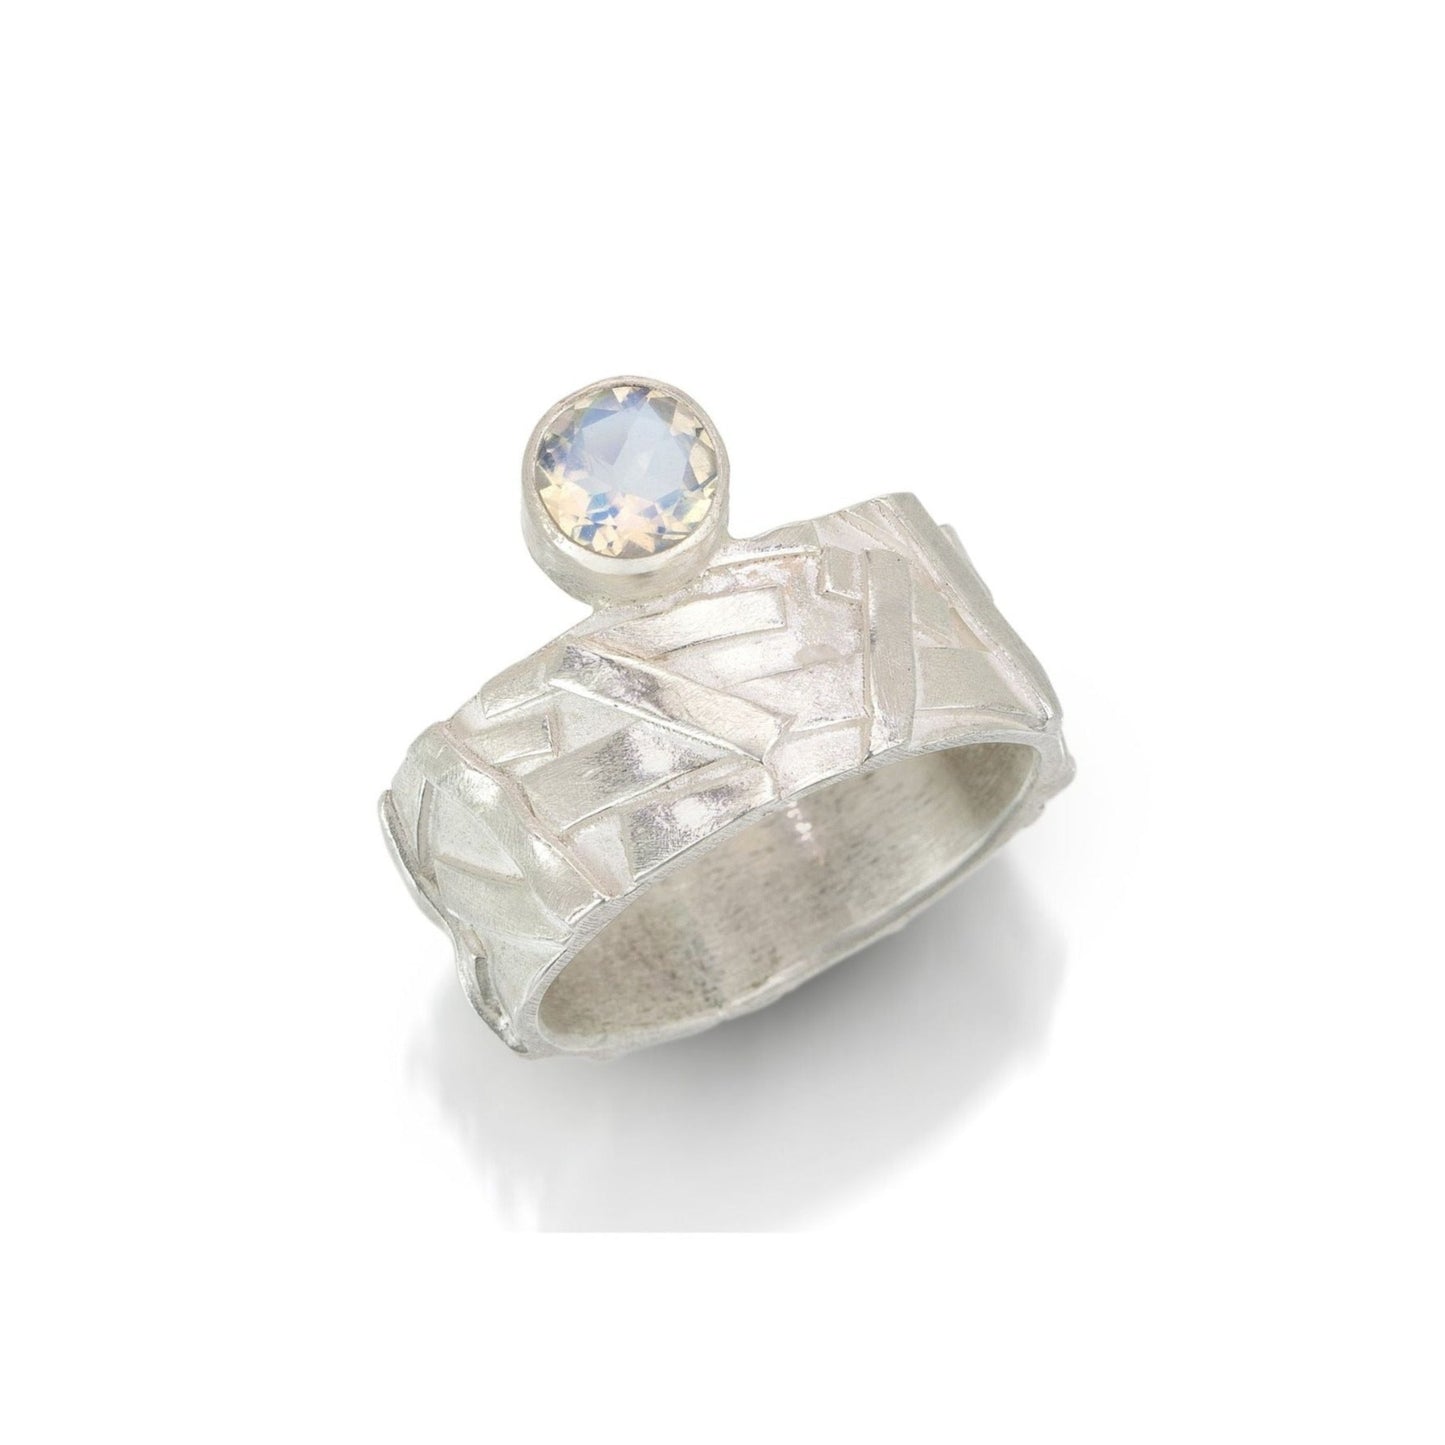 Moonstone and sterling silver ring